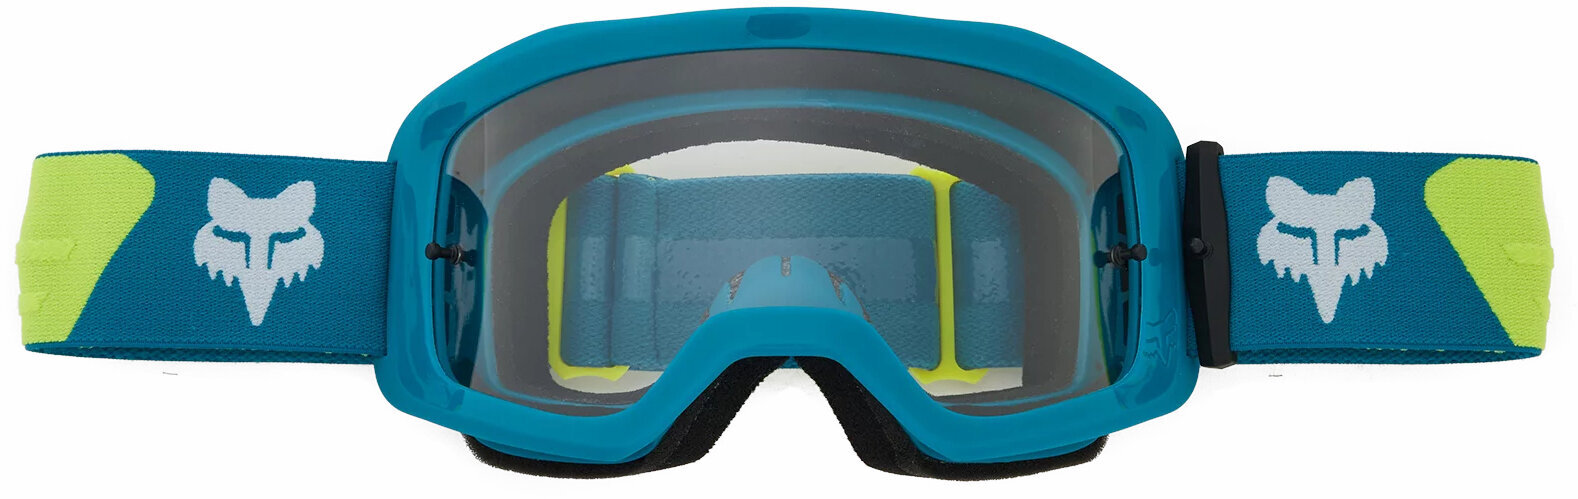 Motorcycle Glasses FOX Main Core Goggles Maui Blue Motorcycle Glasses